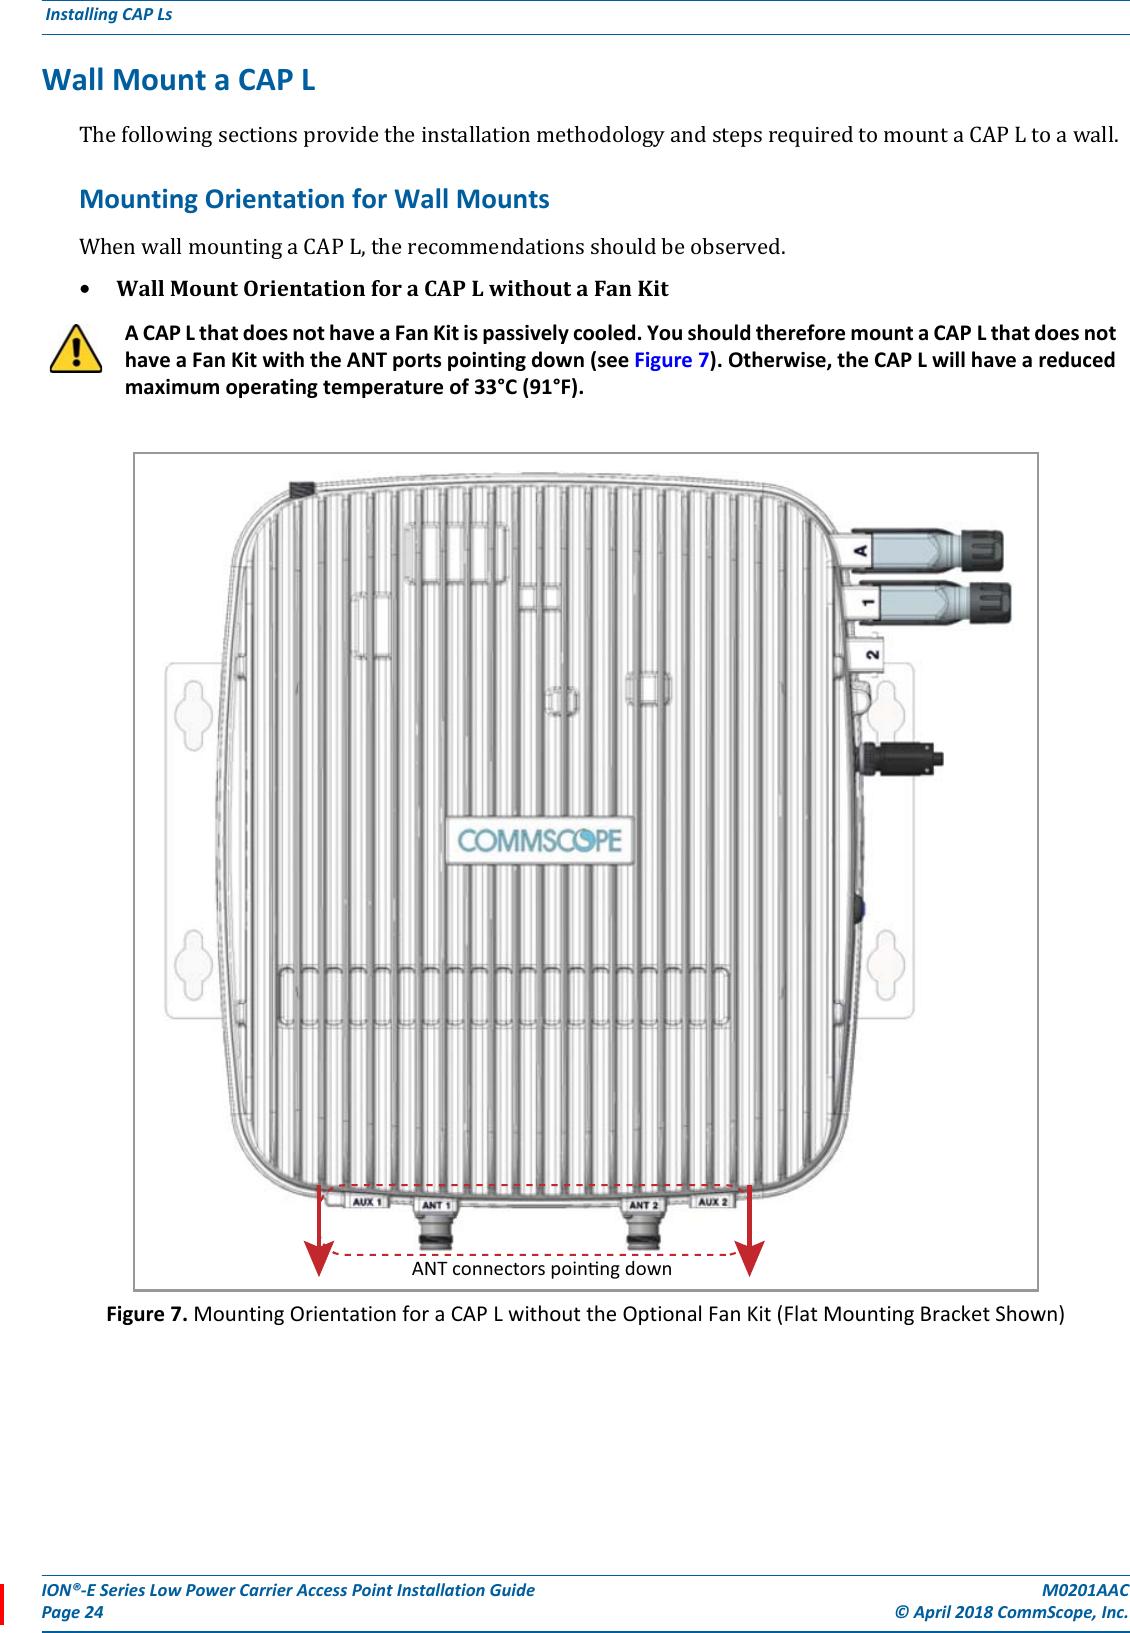 ION®-E Series Low Power Carrier Access Point Installation Guide M0201AACPage 24 © April 2018 CommScope, Inc. Installing CAP Ls  Wall Mount a CAP LThefollowingsectionsprovidetheinstallationmethodologyandstepsrequiredtomountaCAPLtoawall.Mounting Orientation for Wall MountsWhenwallmountingaCAPL,therecommendationsshouldbeobserved.•WallMountOrientationforaCAPLwithoutaFanKitFigure 7. Mounting Orientation for a CAP L without the Optional Fan Kit (Flat Mounting Bracket Shown)A CAP L that does not have a Fan Kit is passively cooled. You should therefore mount a CAP L that does not have a Fan Kit with the ANT ports pointing down (see Figure 7). Otherwise, the CAP L will have a reduced maximum operating temperature of 33°C (91°F).ANT connectors poinng down